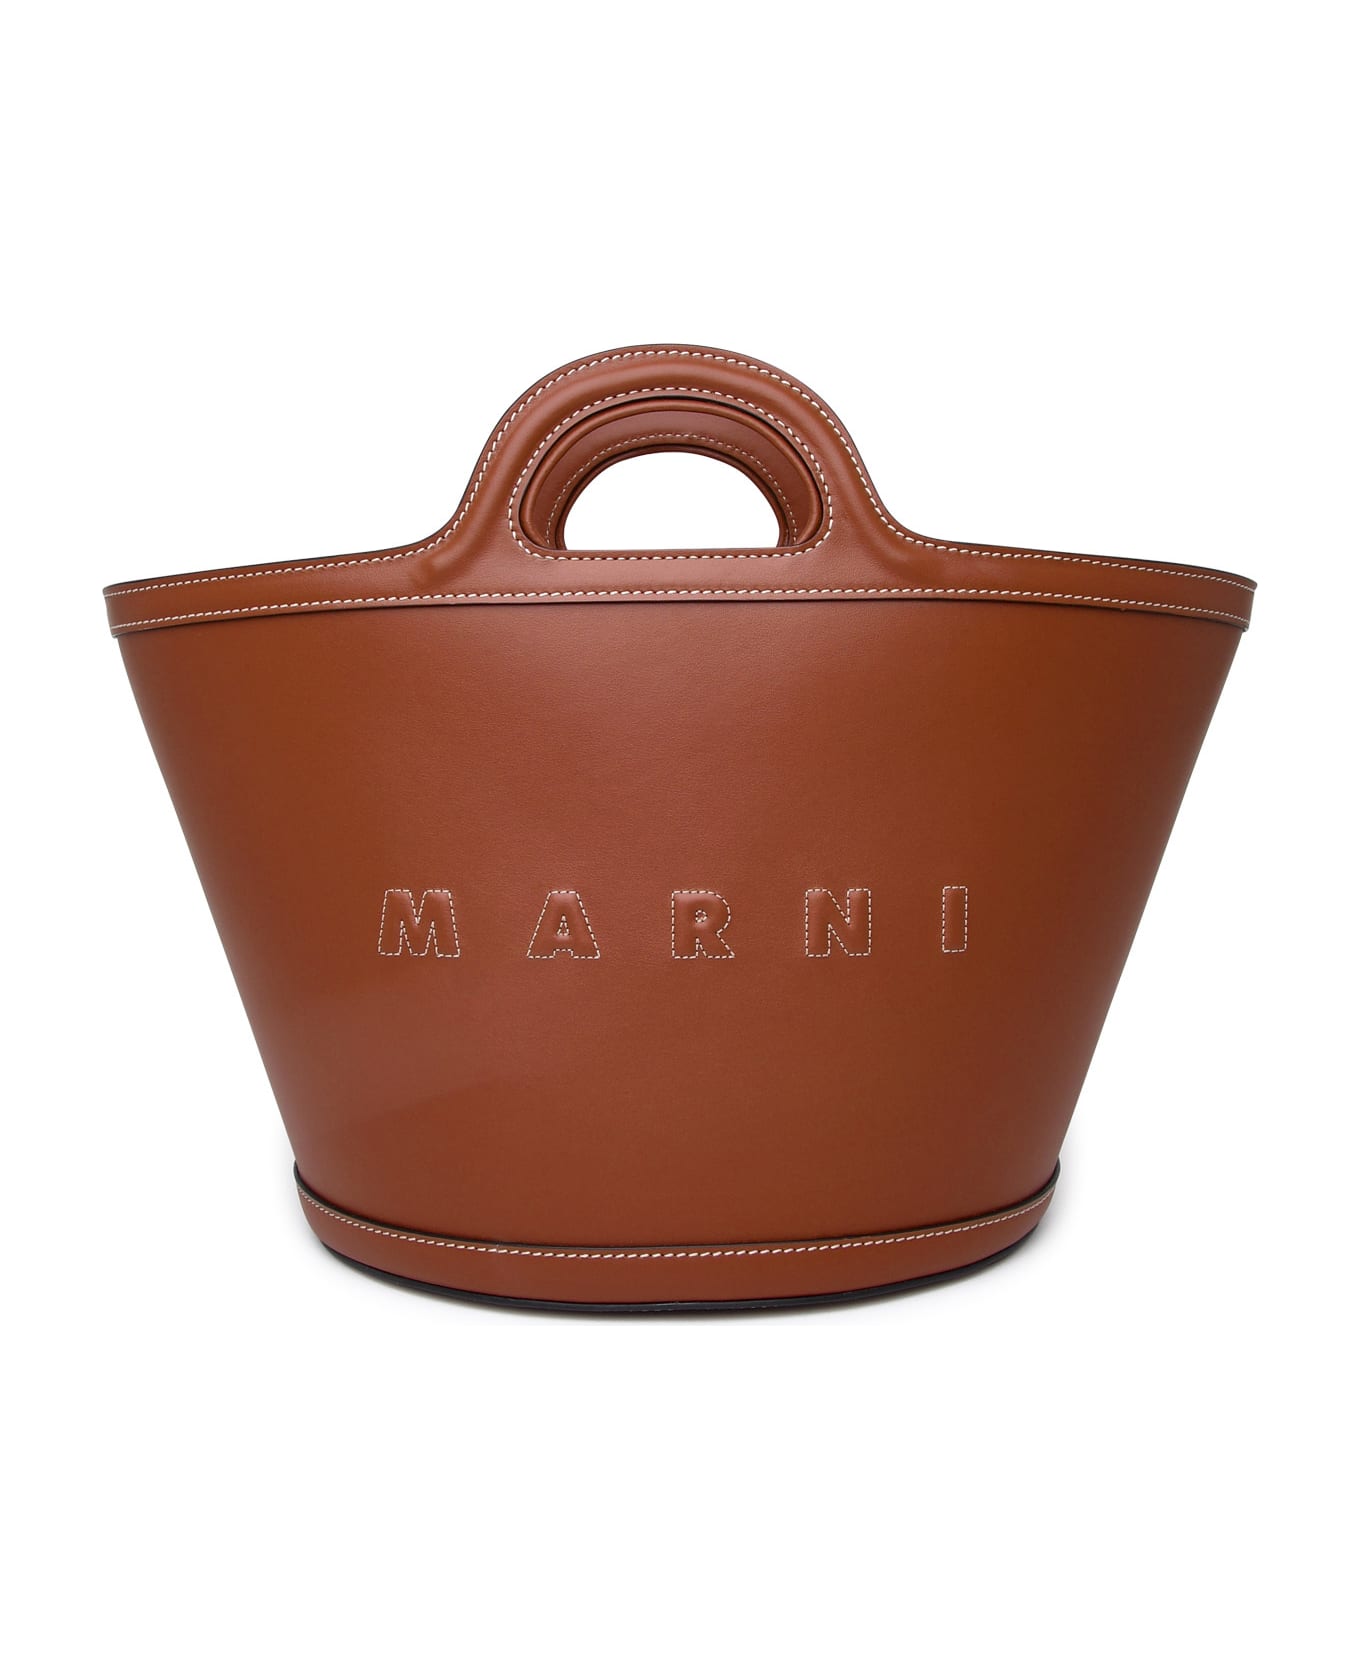 Marni Tropicalia Small Bag In Brown Leather - Brown トートバッグ